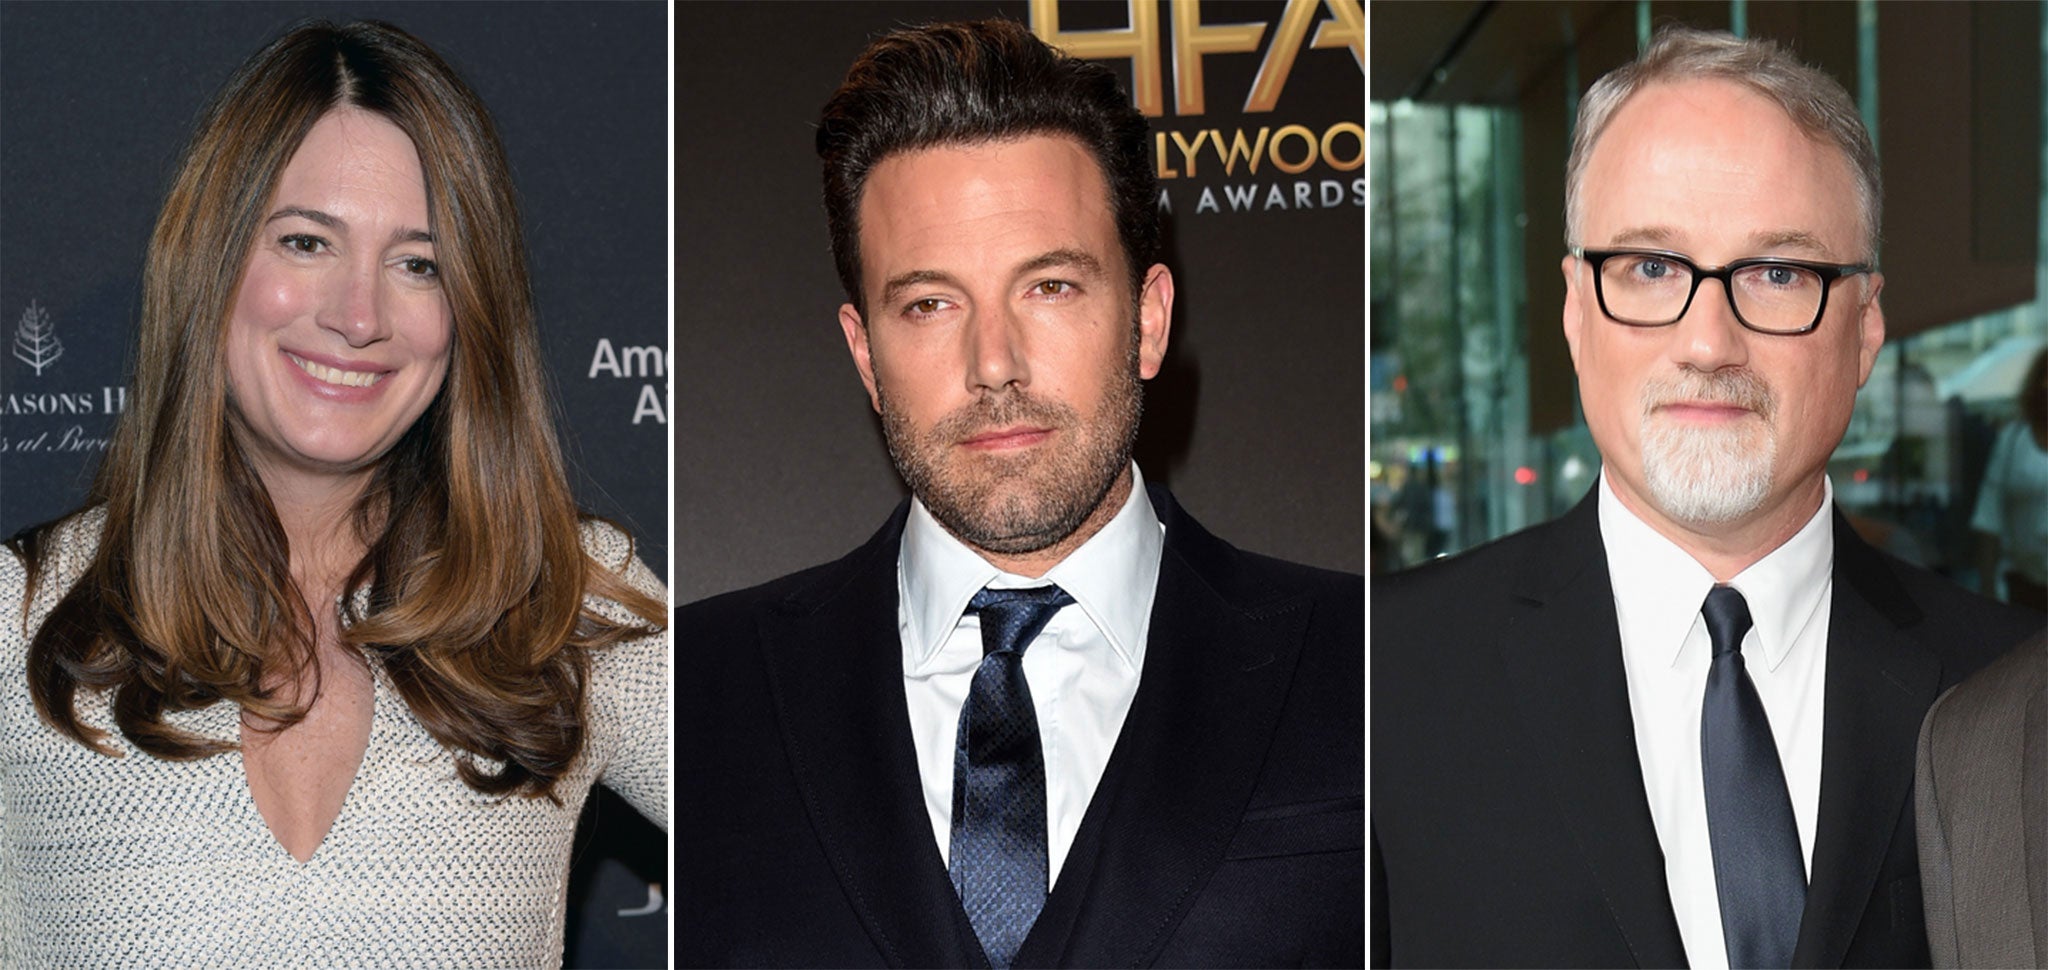 Gillian Flynn, Ben Affleck and David Fincher are working on a reboot of Strangers on a Train